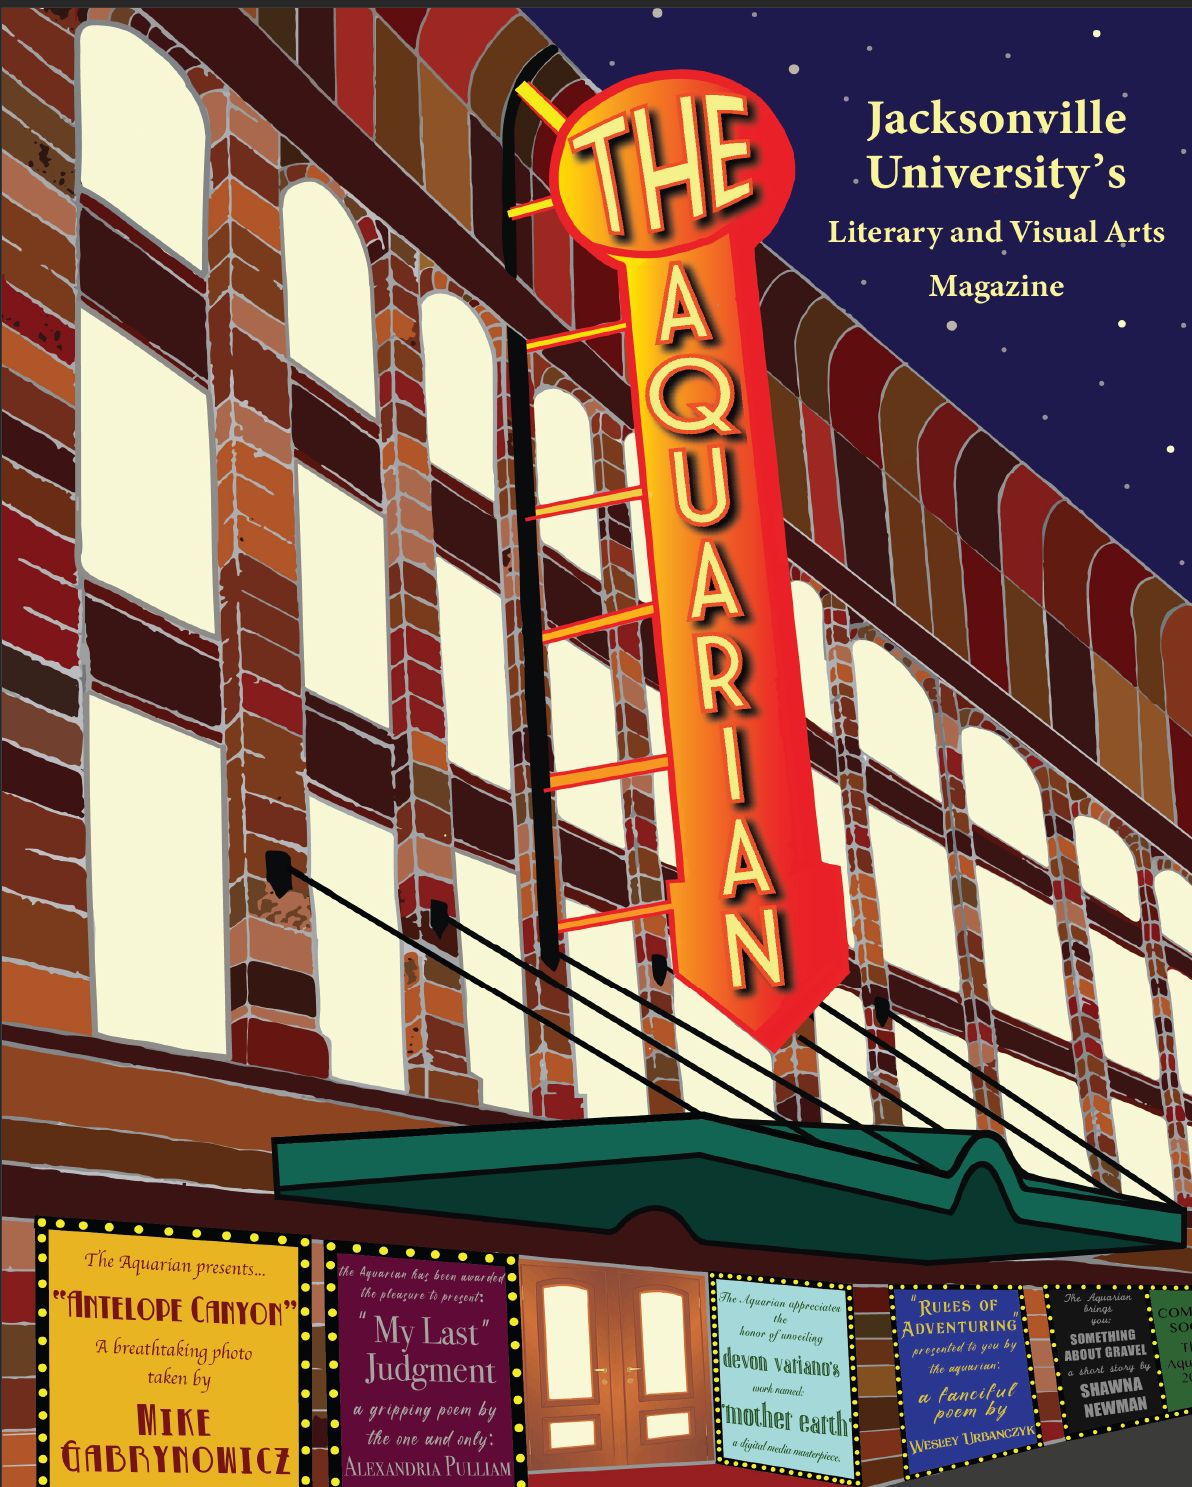 2018 cover. Depicts a New York Broadway style red brick building with a lit up sign that says "The Aquarian"